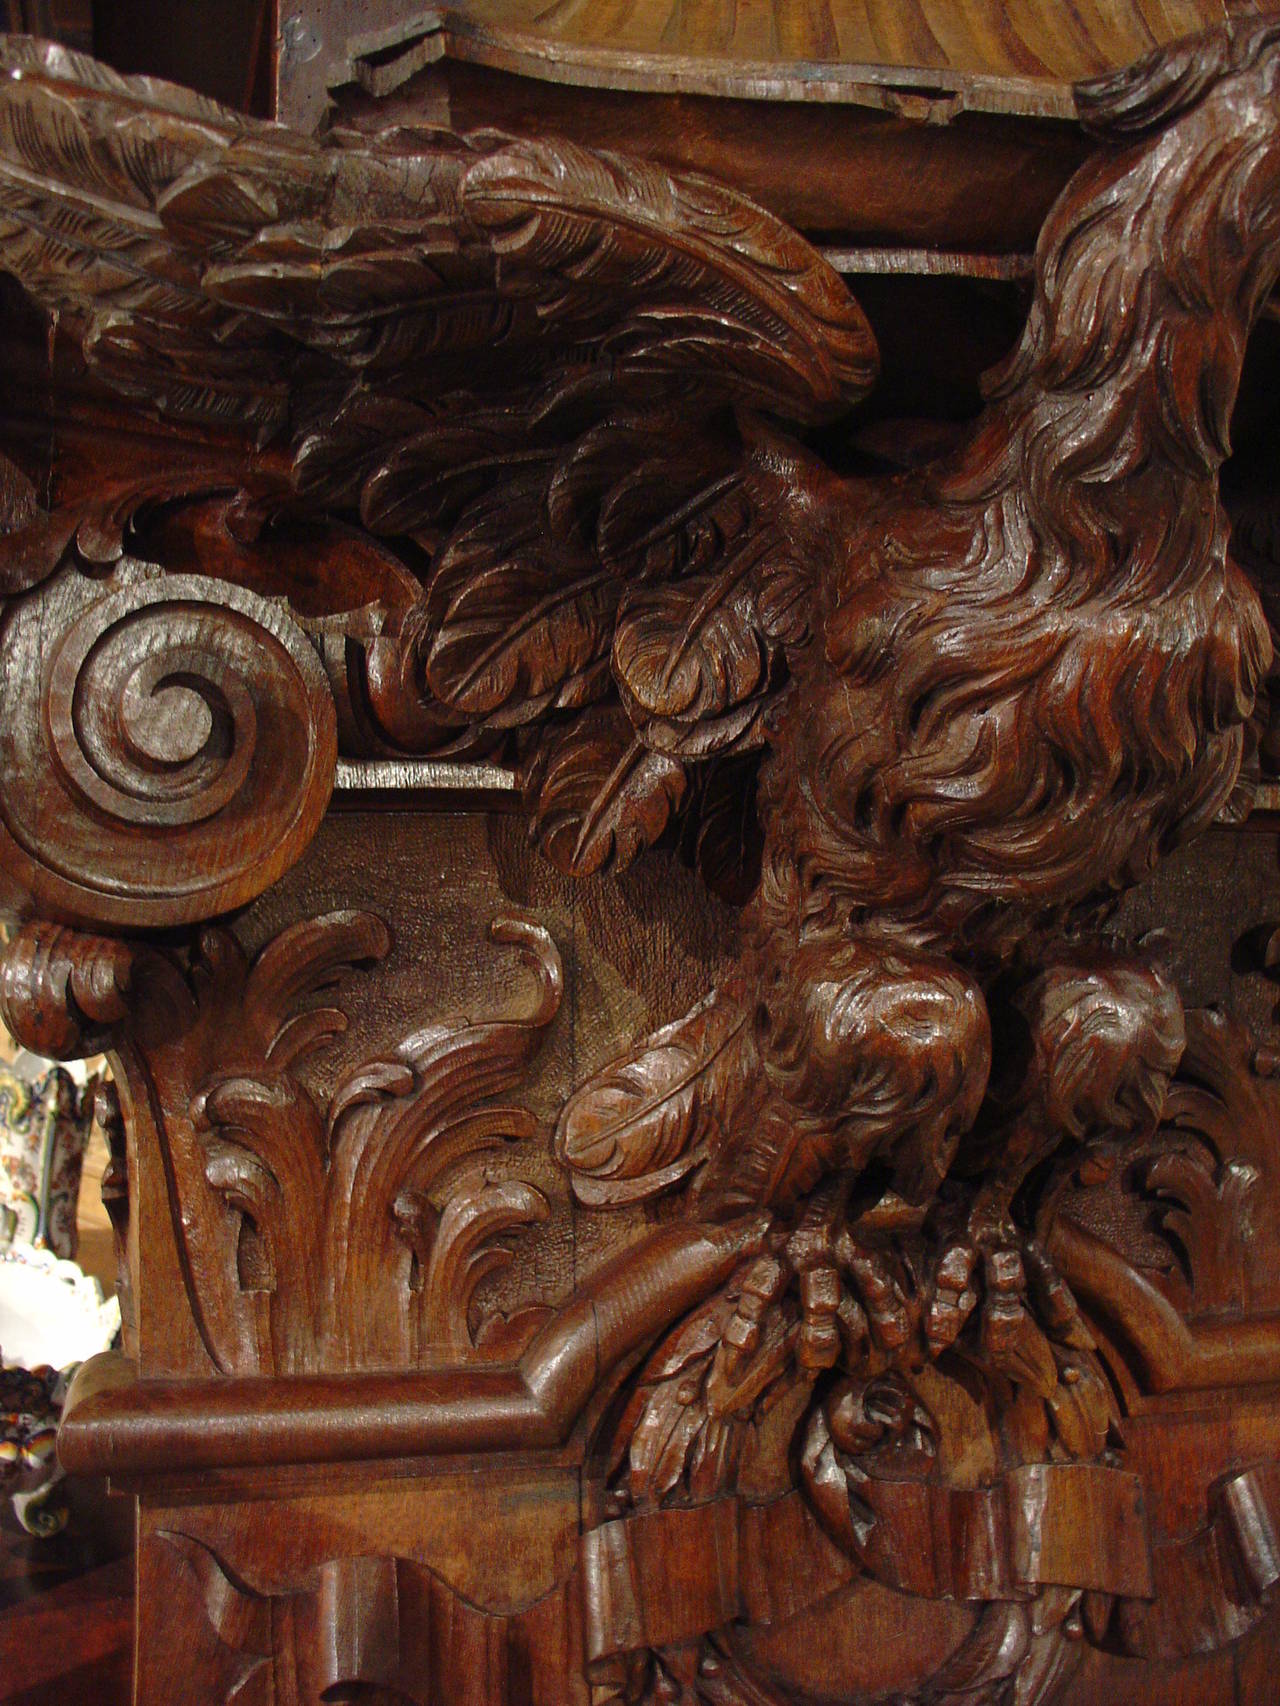 This extremely unique French architectural is carved from French oak and most likely served as a  stylized Ionic pilaster.  It has magnificent hand carved details on all of its motifs.  This pilaster/panel may have been in a boiserie (wooden paneled